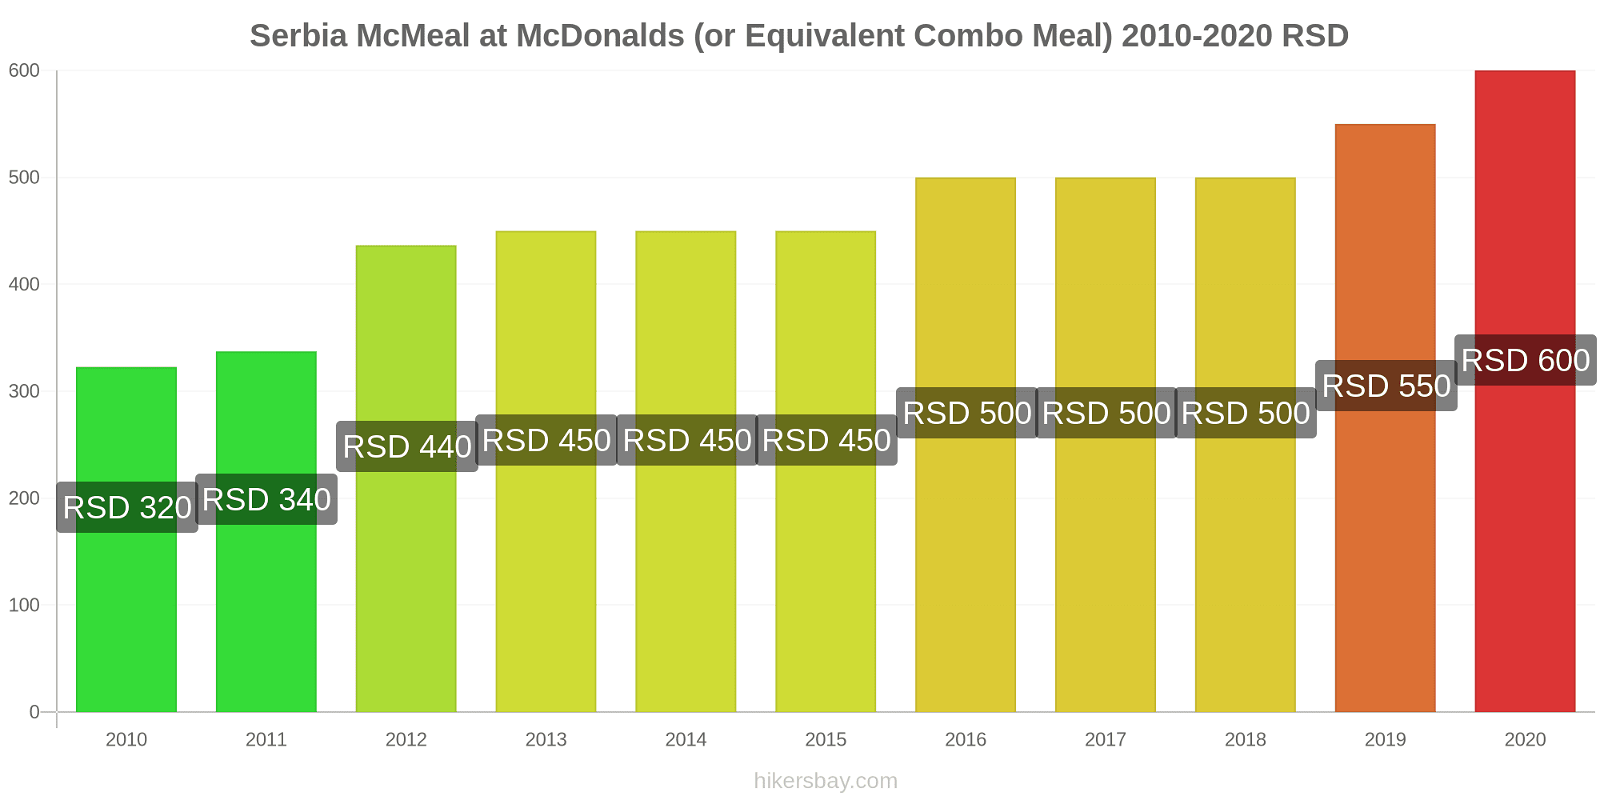 Serbia price changes McMeal at McDonalds (or Equivalent Combo Meal) hikersbay.com